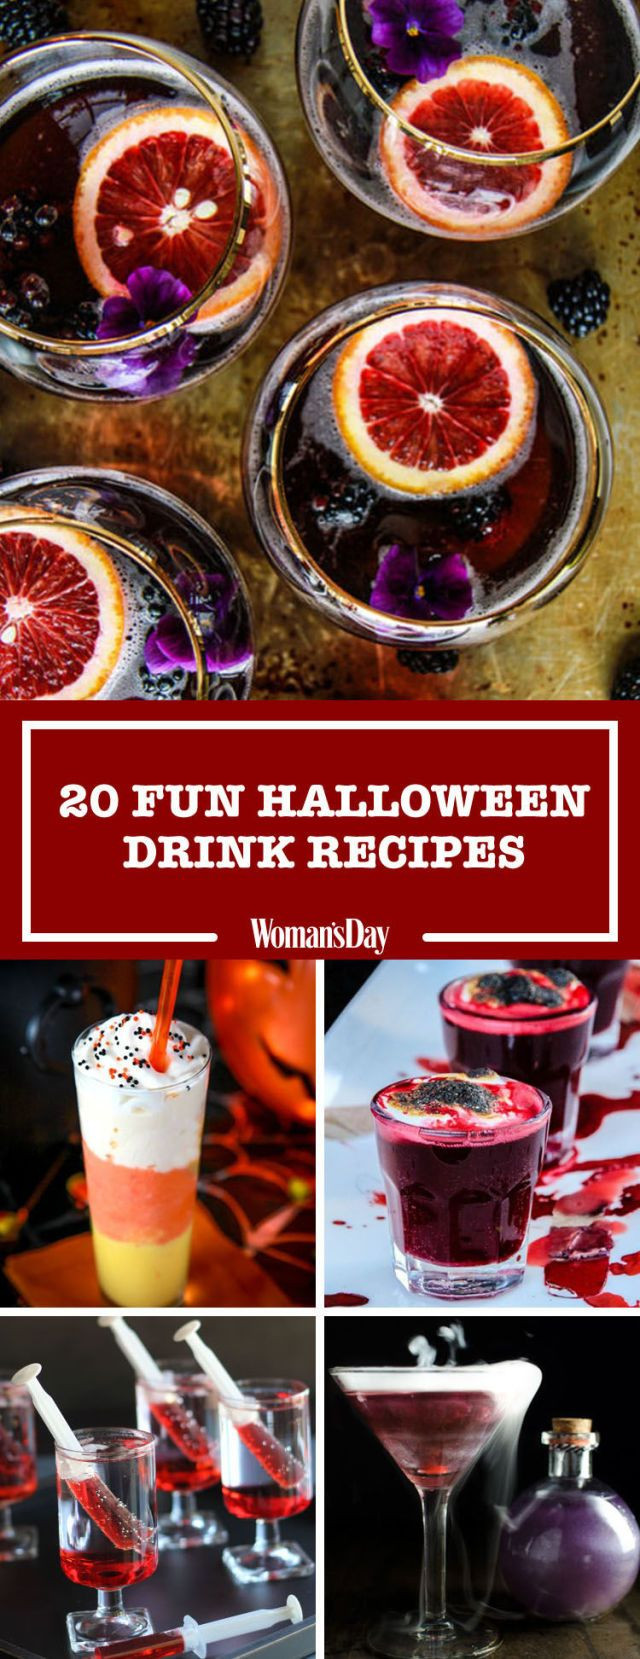 Easy Halloween Drinks Alcohol
 25 Easy Halloween Cocktails & Drinks Recipes for